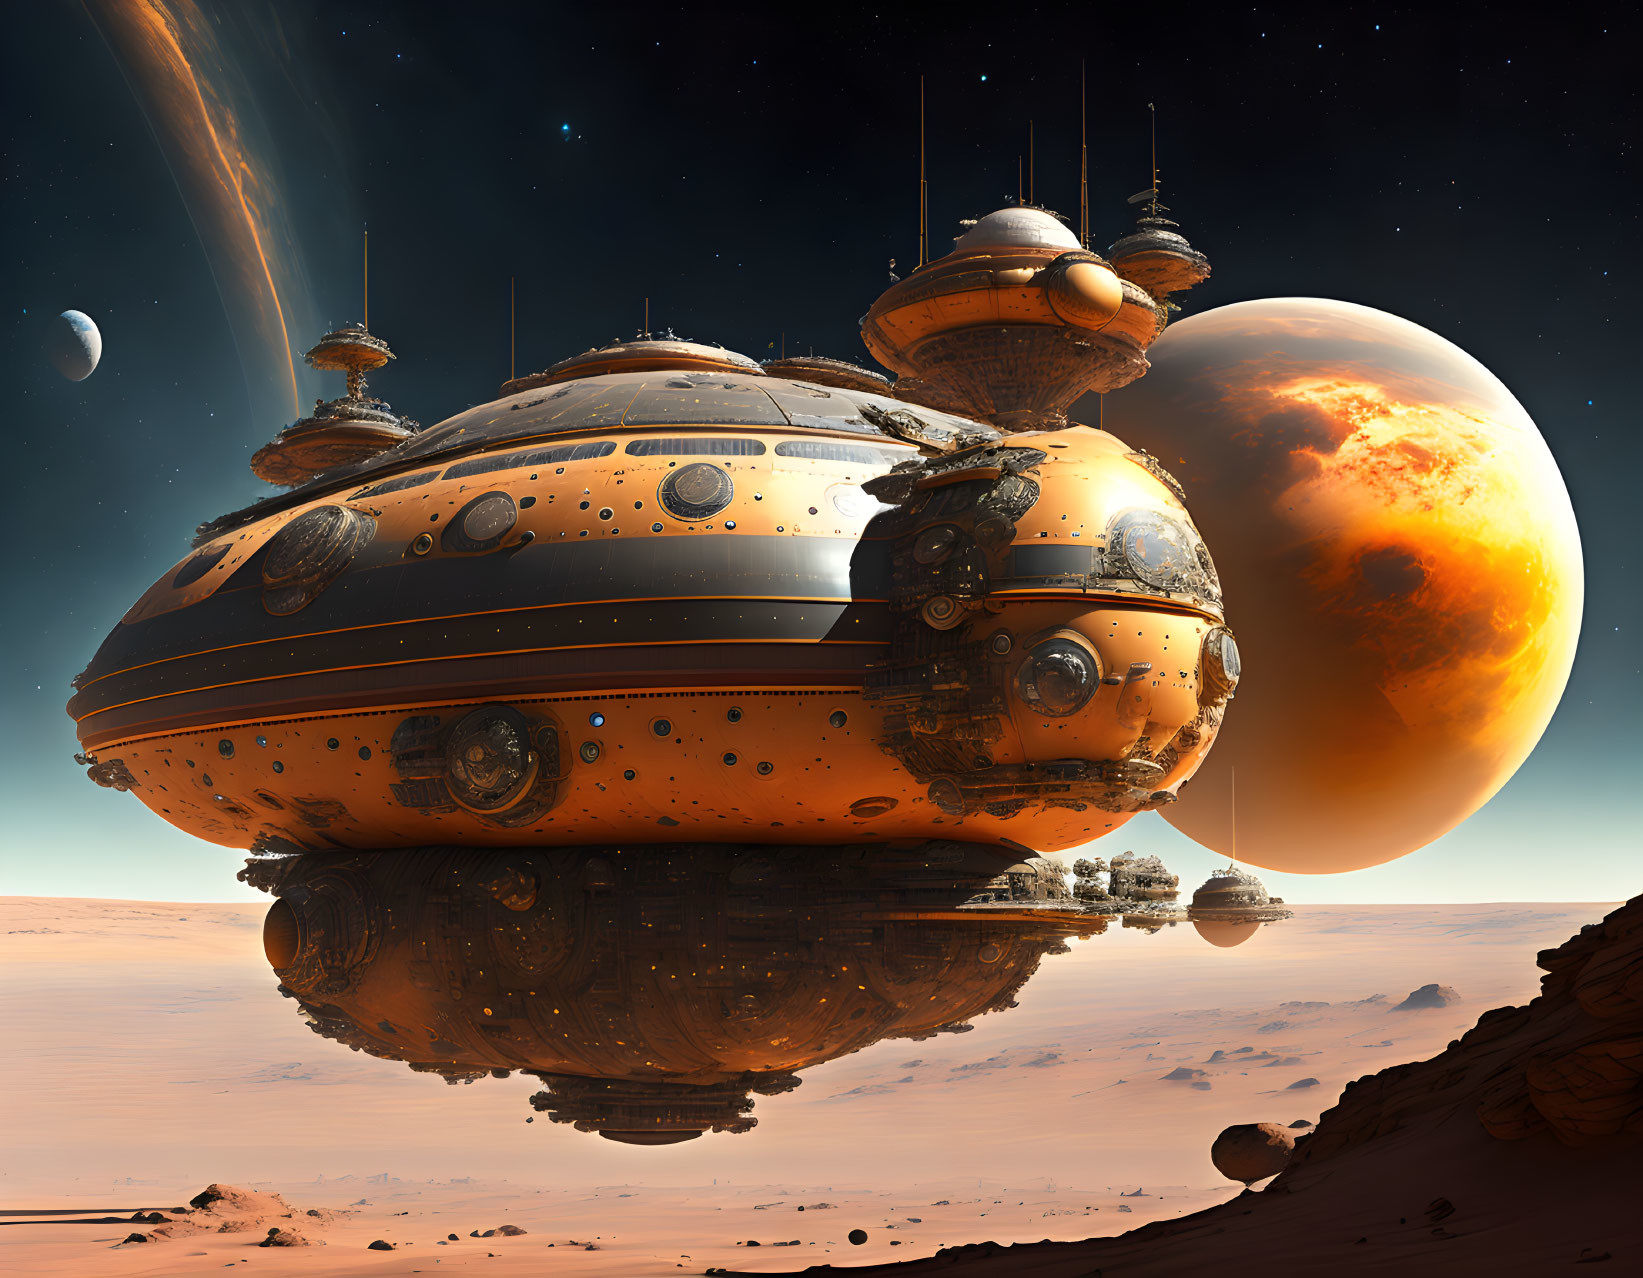 Futuristic spaceship above barren alien landscape with planet and moon.